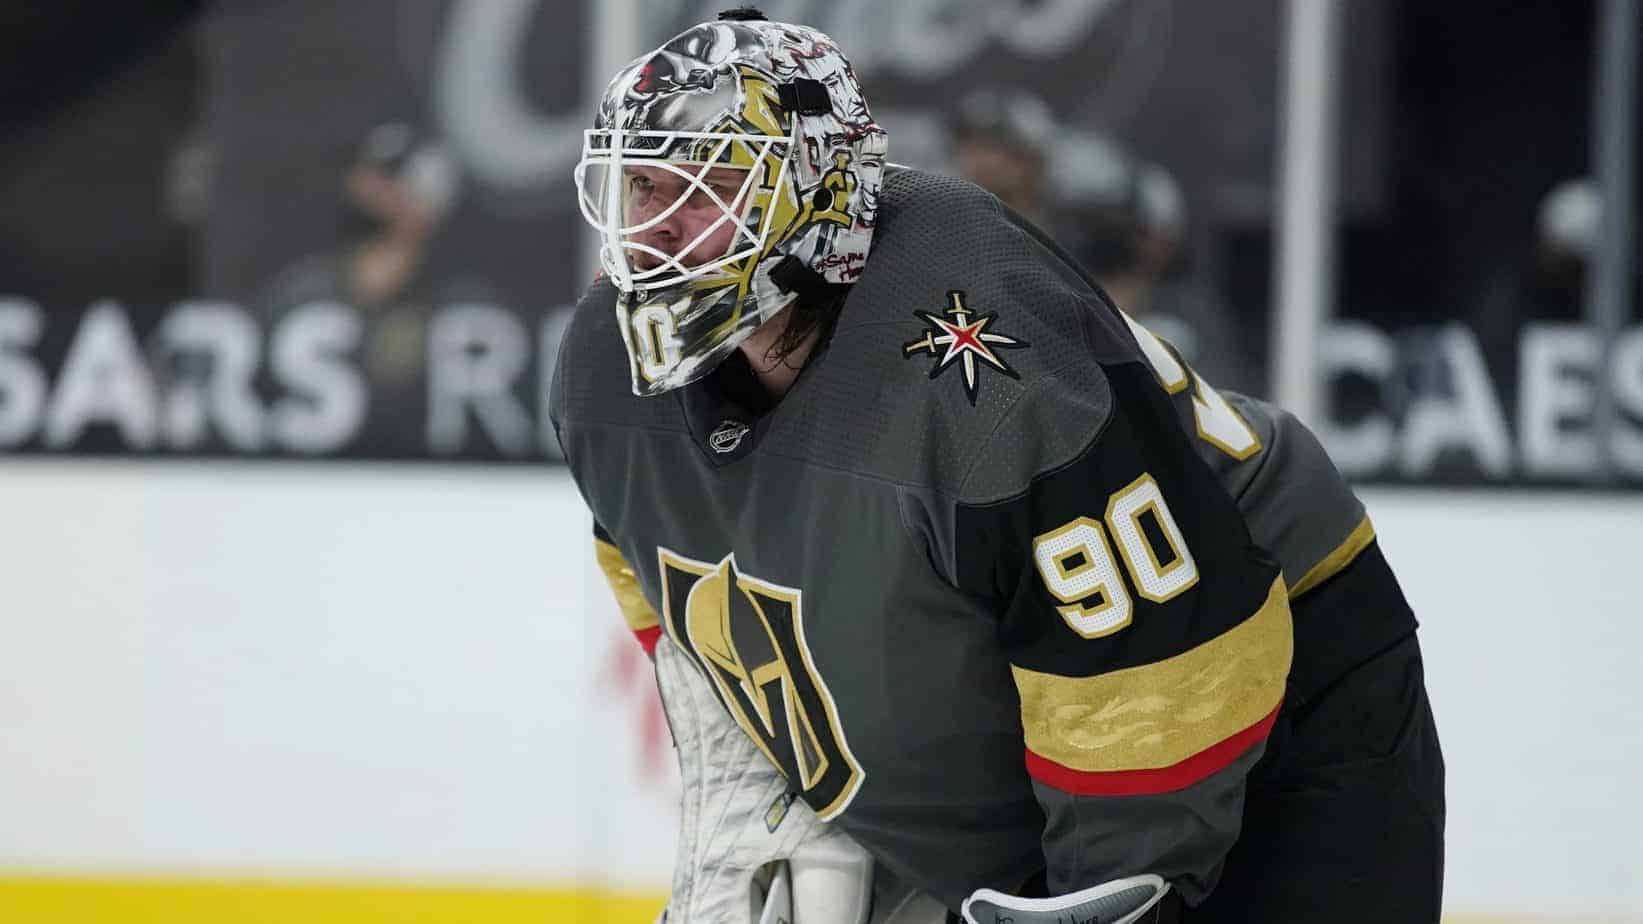 Josh Anderson gives his best NHL player prop bets and betting picks using Awesemo's betting tool and OddsShopper for tonight's season opener